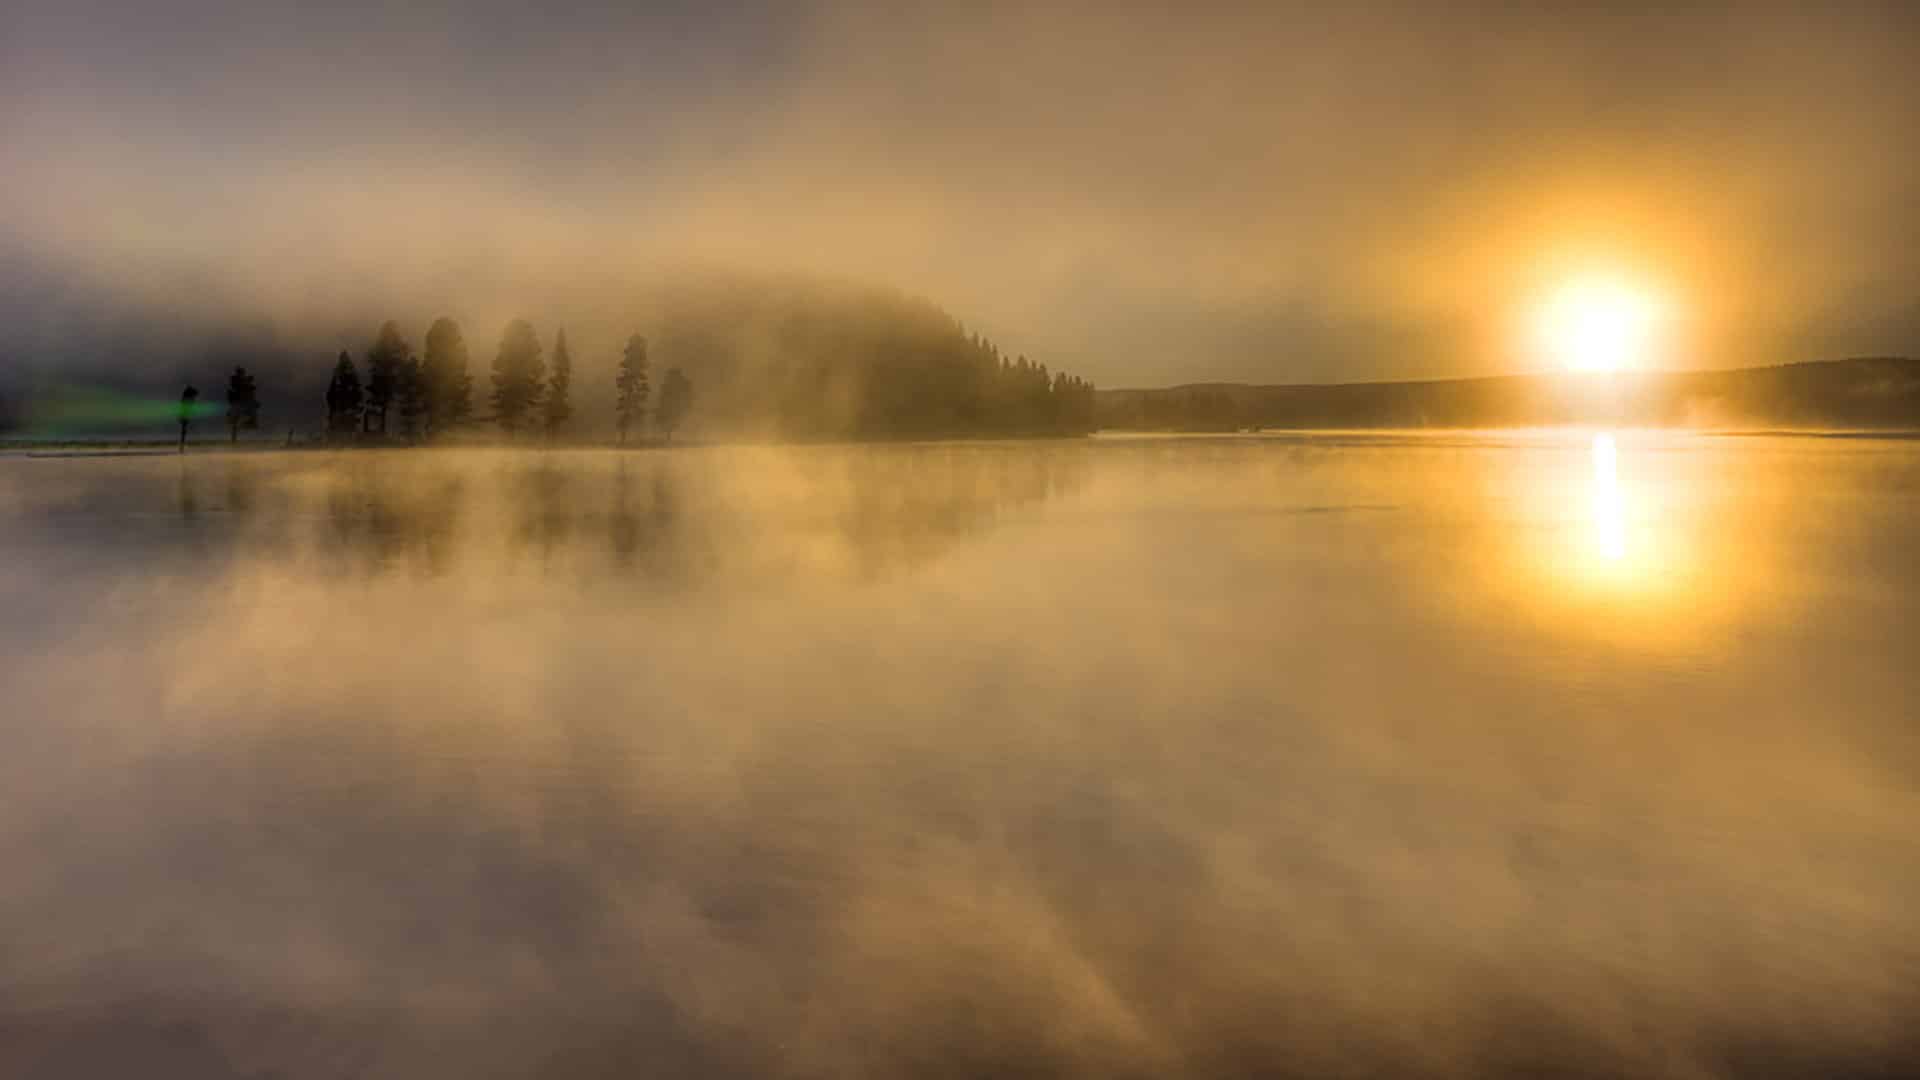 Mist off the River